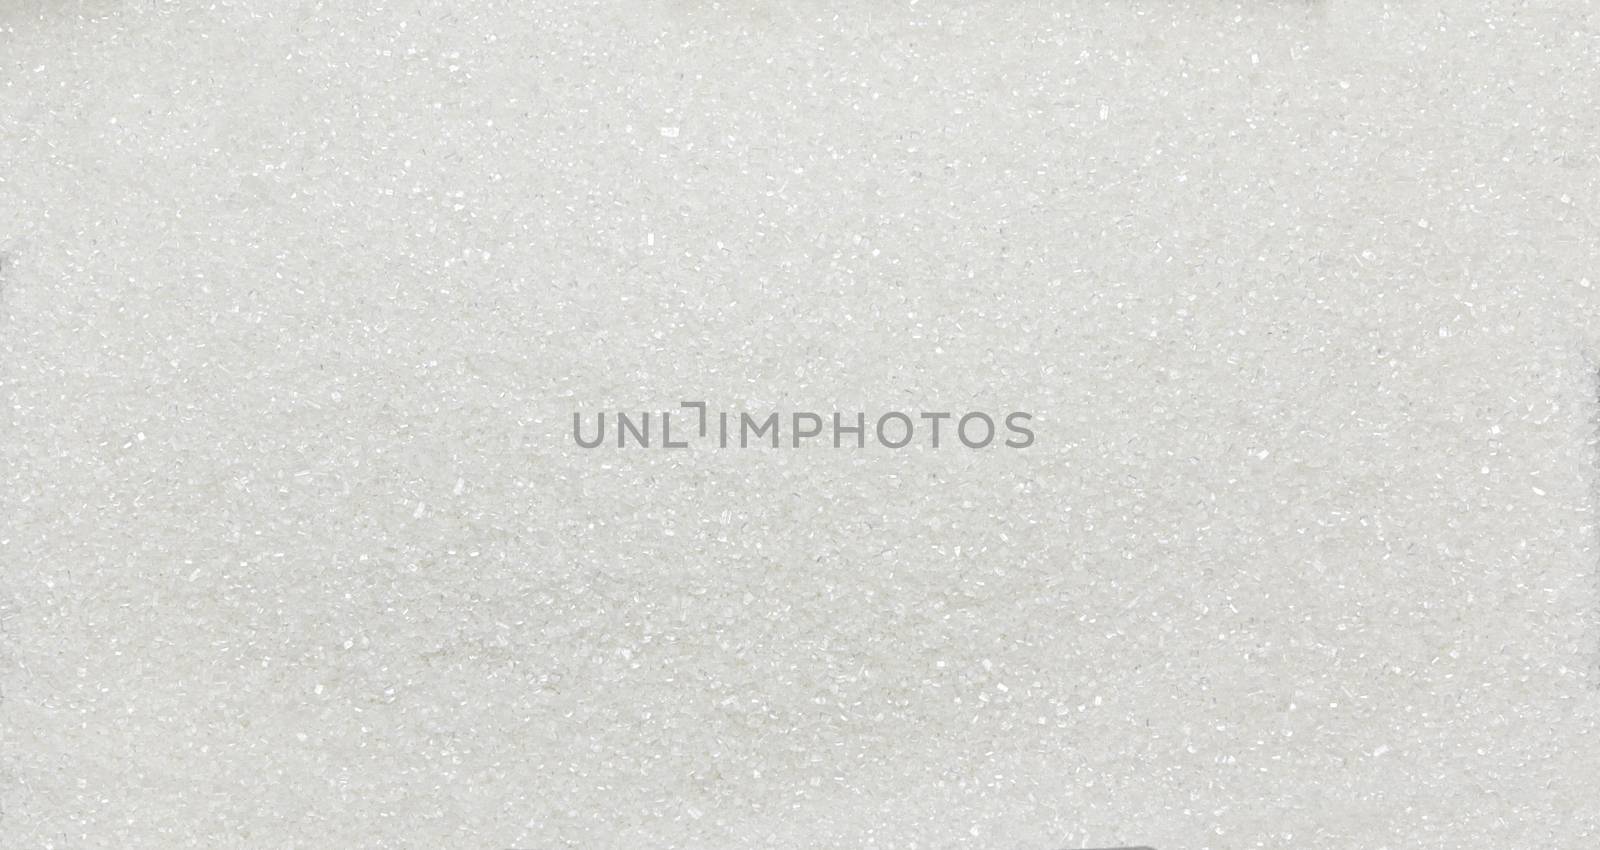 Heap of white sugar crystals - texture and details, close up